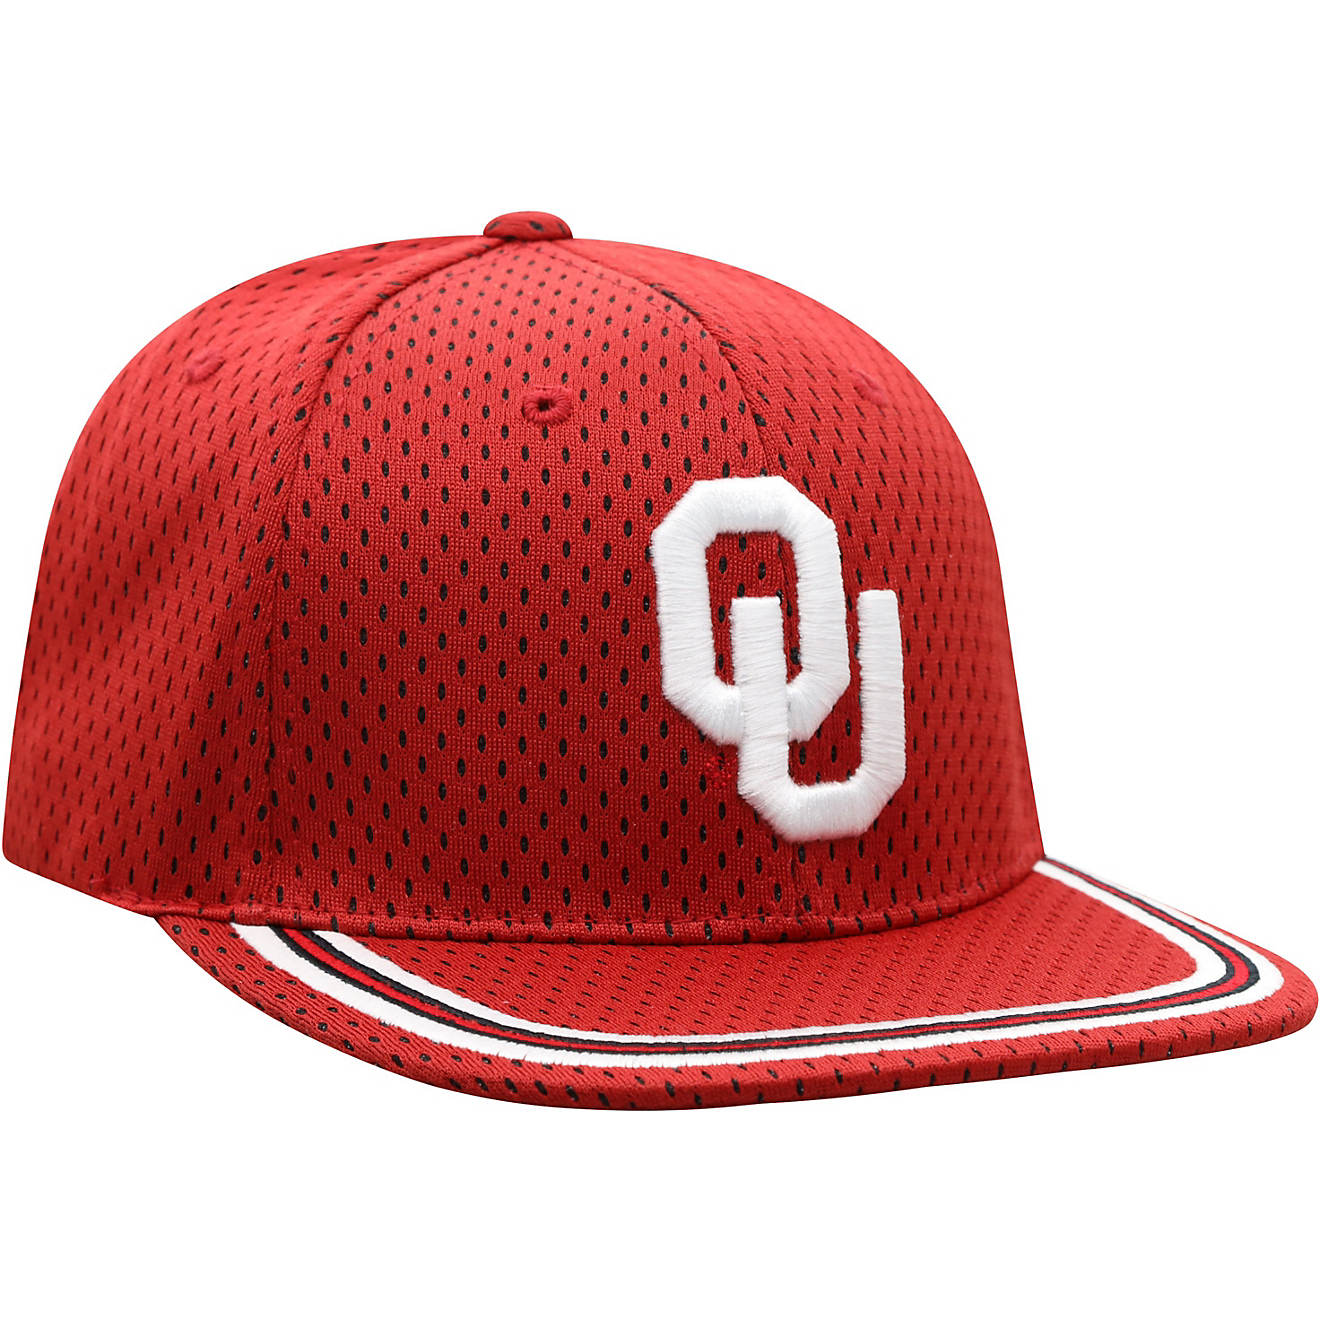 Top of the World Kids' University of Oklahoma Spiker Adjustable Cap                                                              - view number 1